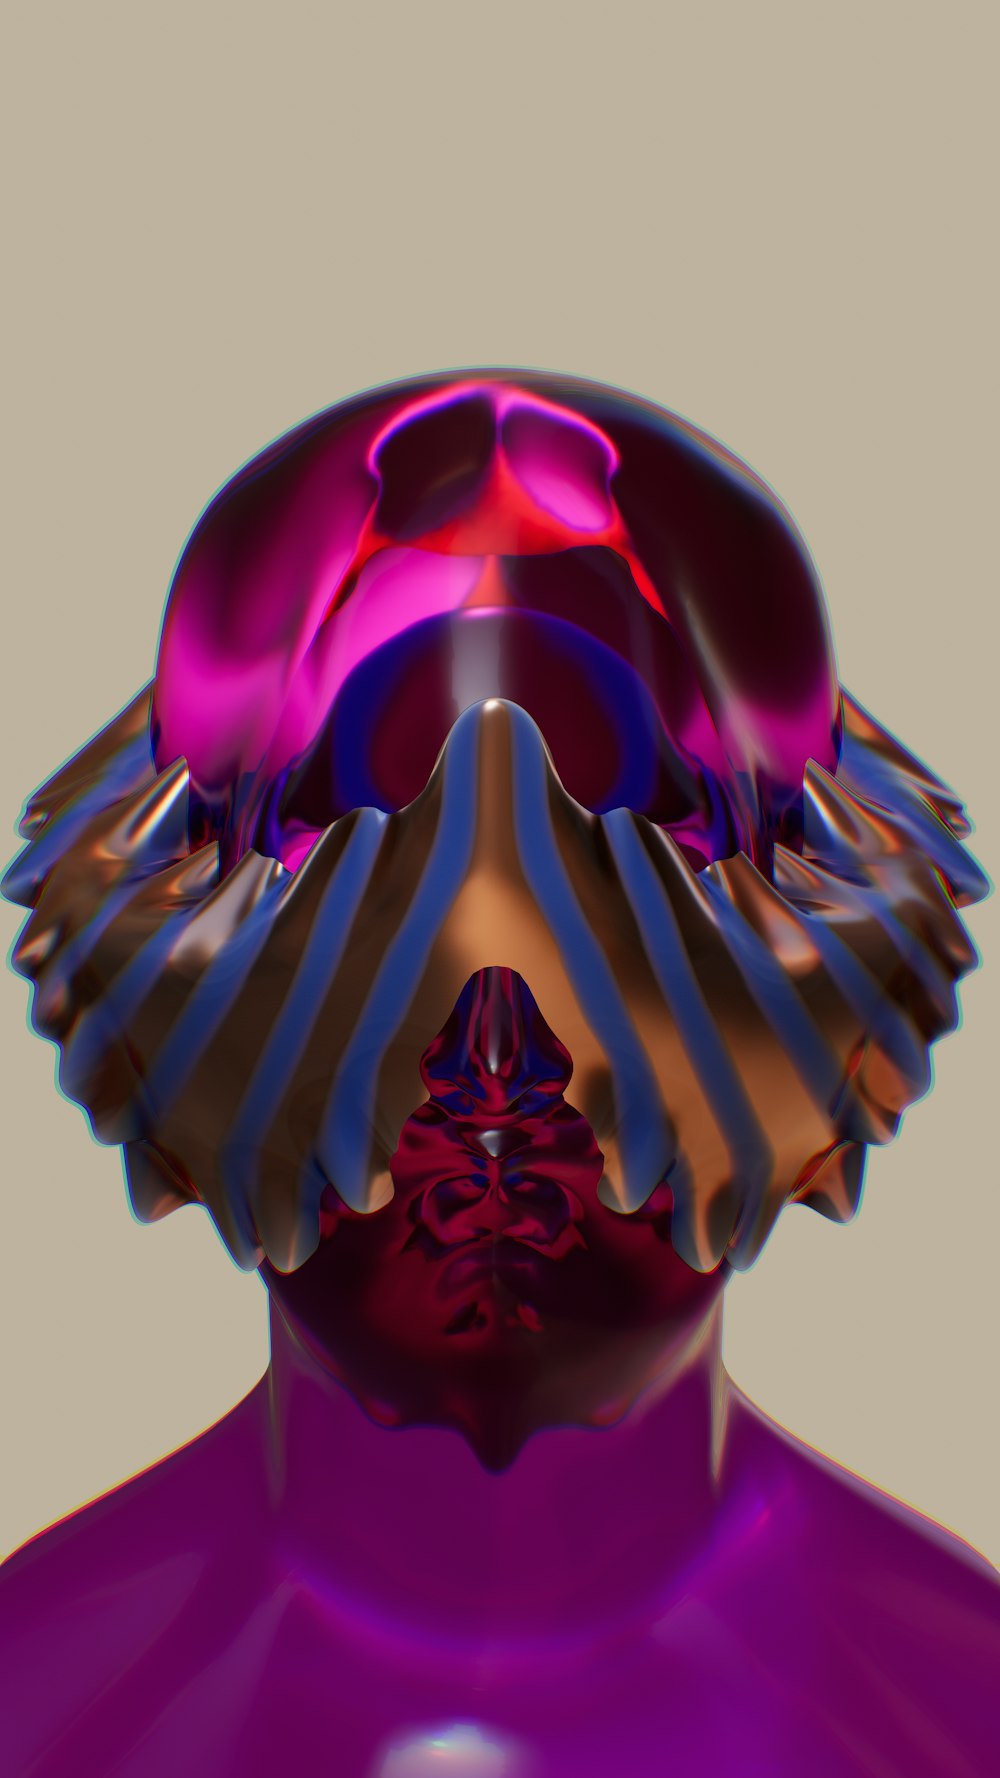 a computer generated image of a man's head